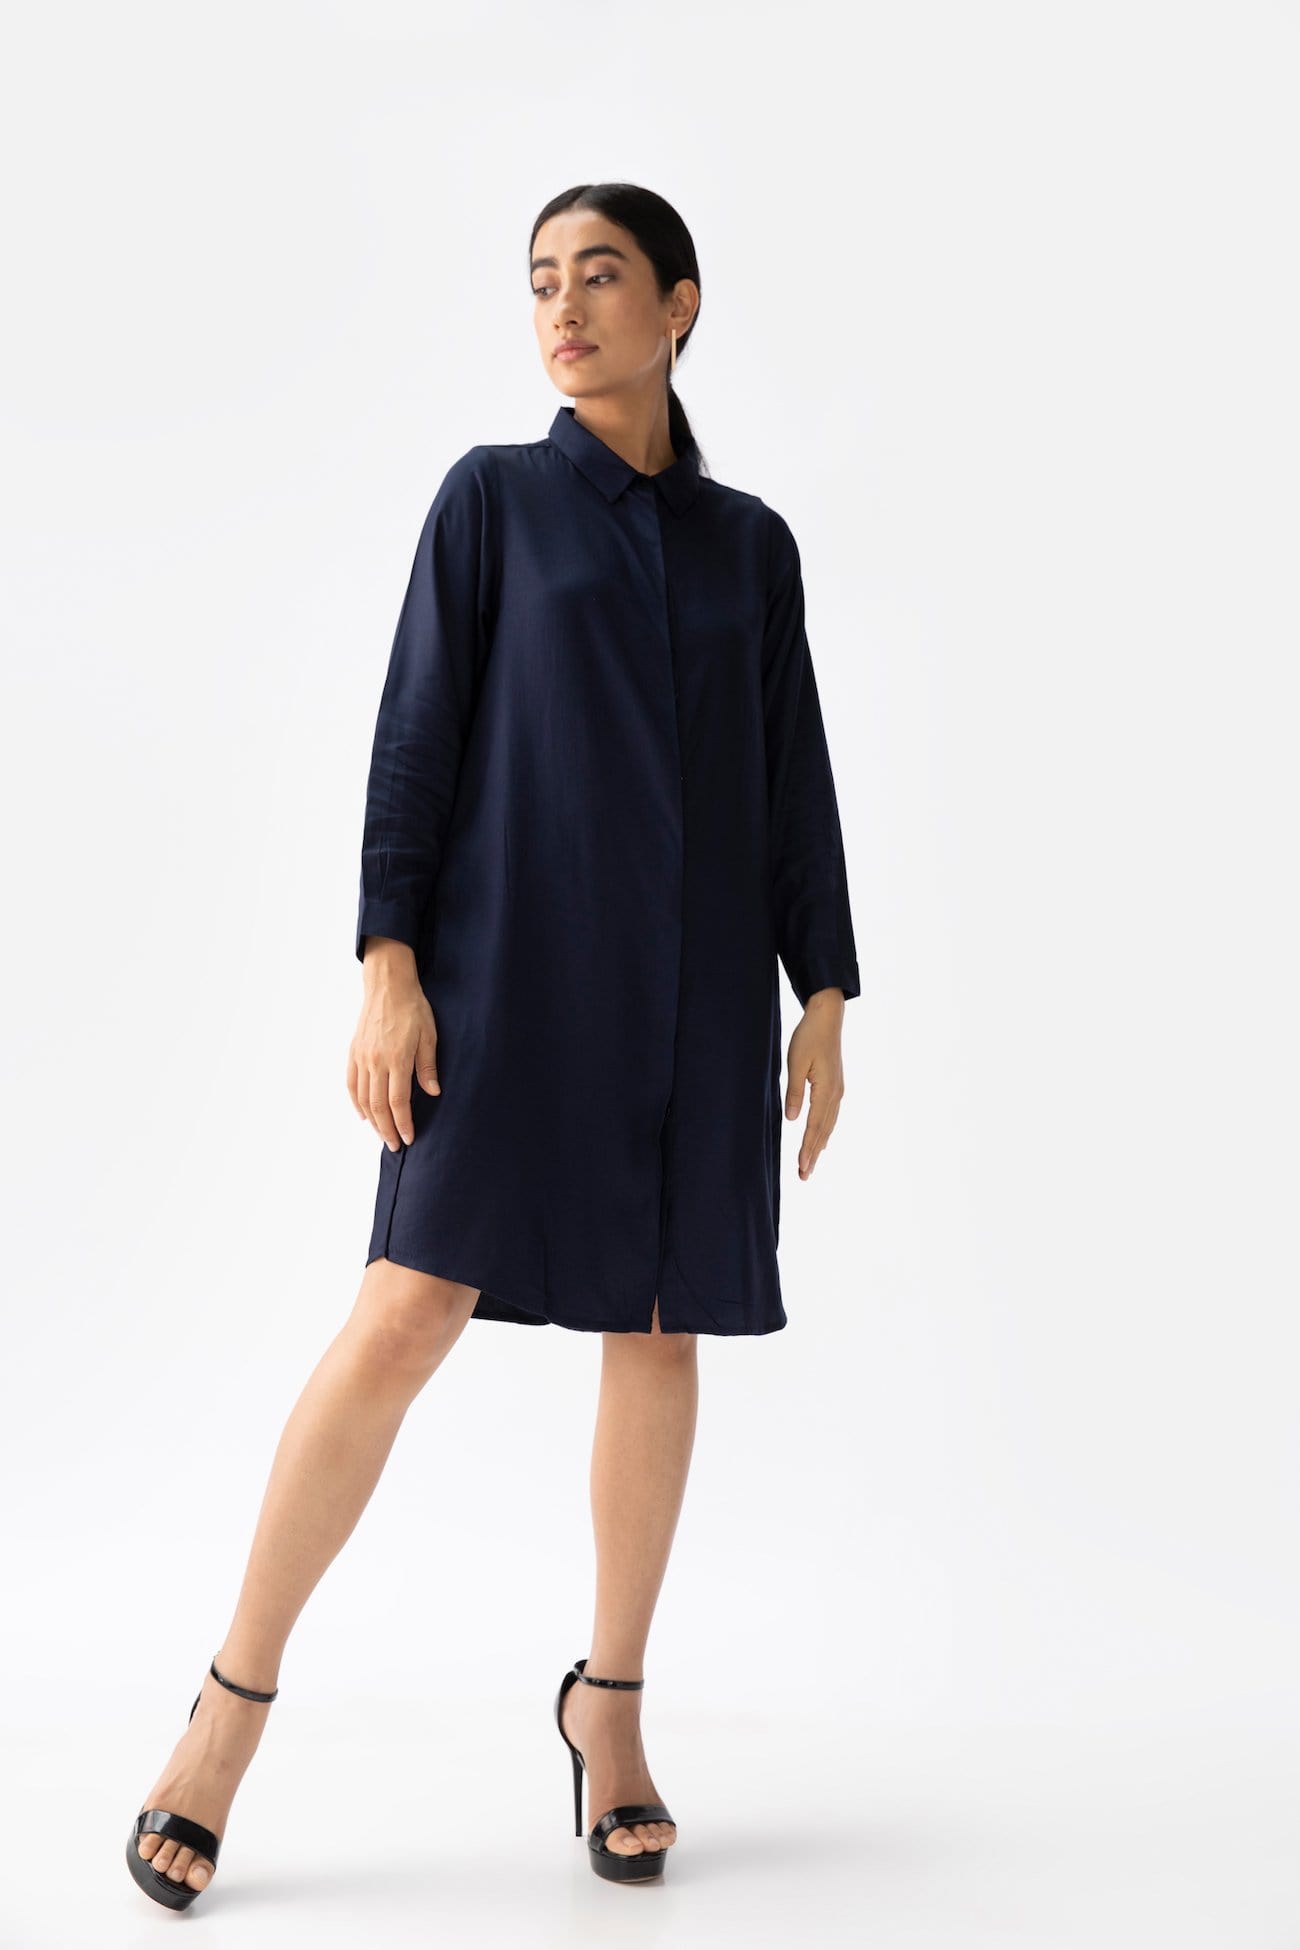 Saltpetre's womens wear - navy blue knee-length long shirt with front buttons, full sleeves and collared neck. Made out of 100% organic cotton.